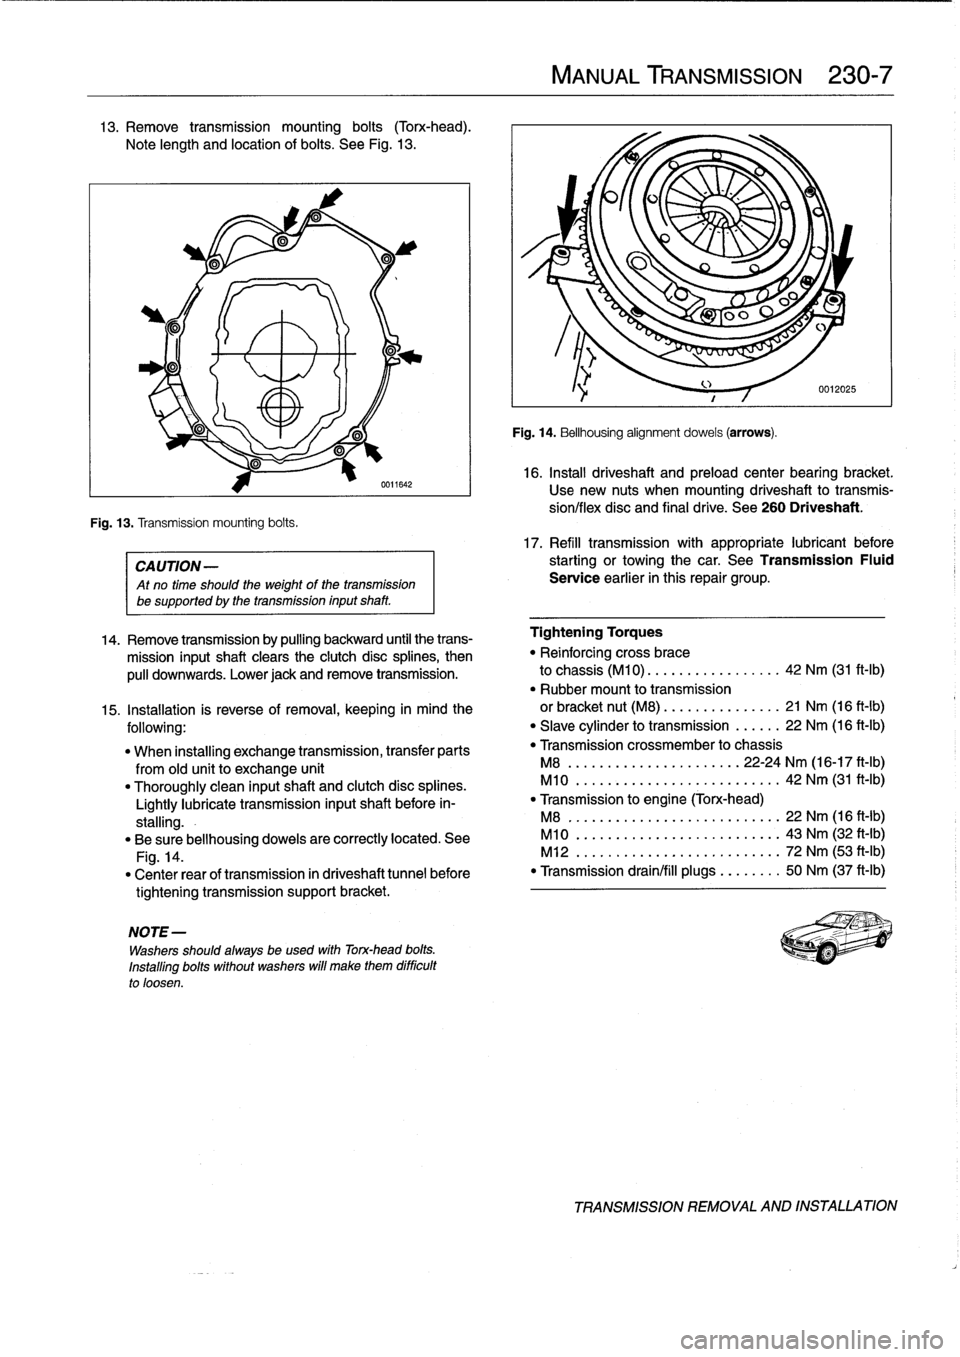 BMW M3 1993 E36 Workshop Manual 13
.
Remove
transmission
mounting
bolts
(Torx-head)
.

Note
length
and
location
of
bolts
.
See
Fig
.
13
.

Fig
.
13
.
Transmission
mounting
bolts
.

0611642

CA
UTION-

Atno
time
should
the
weight
of
